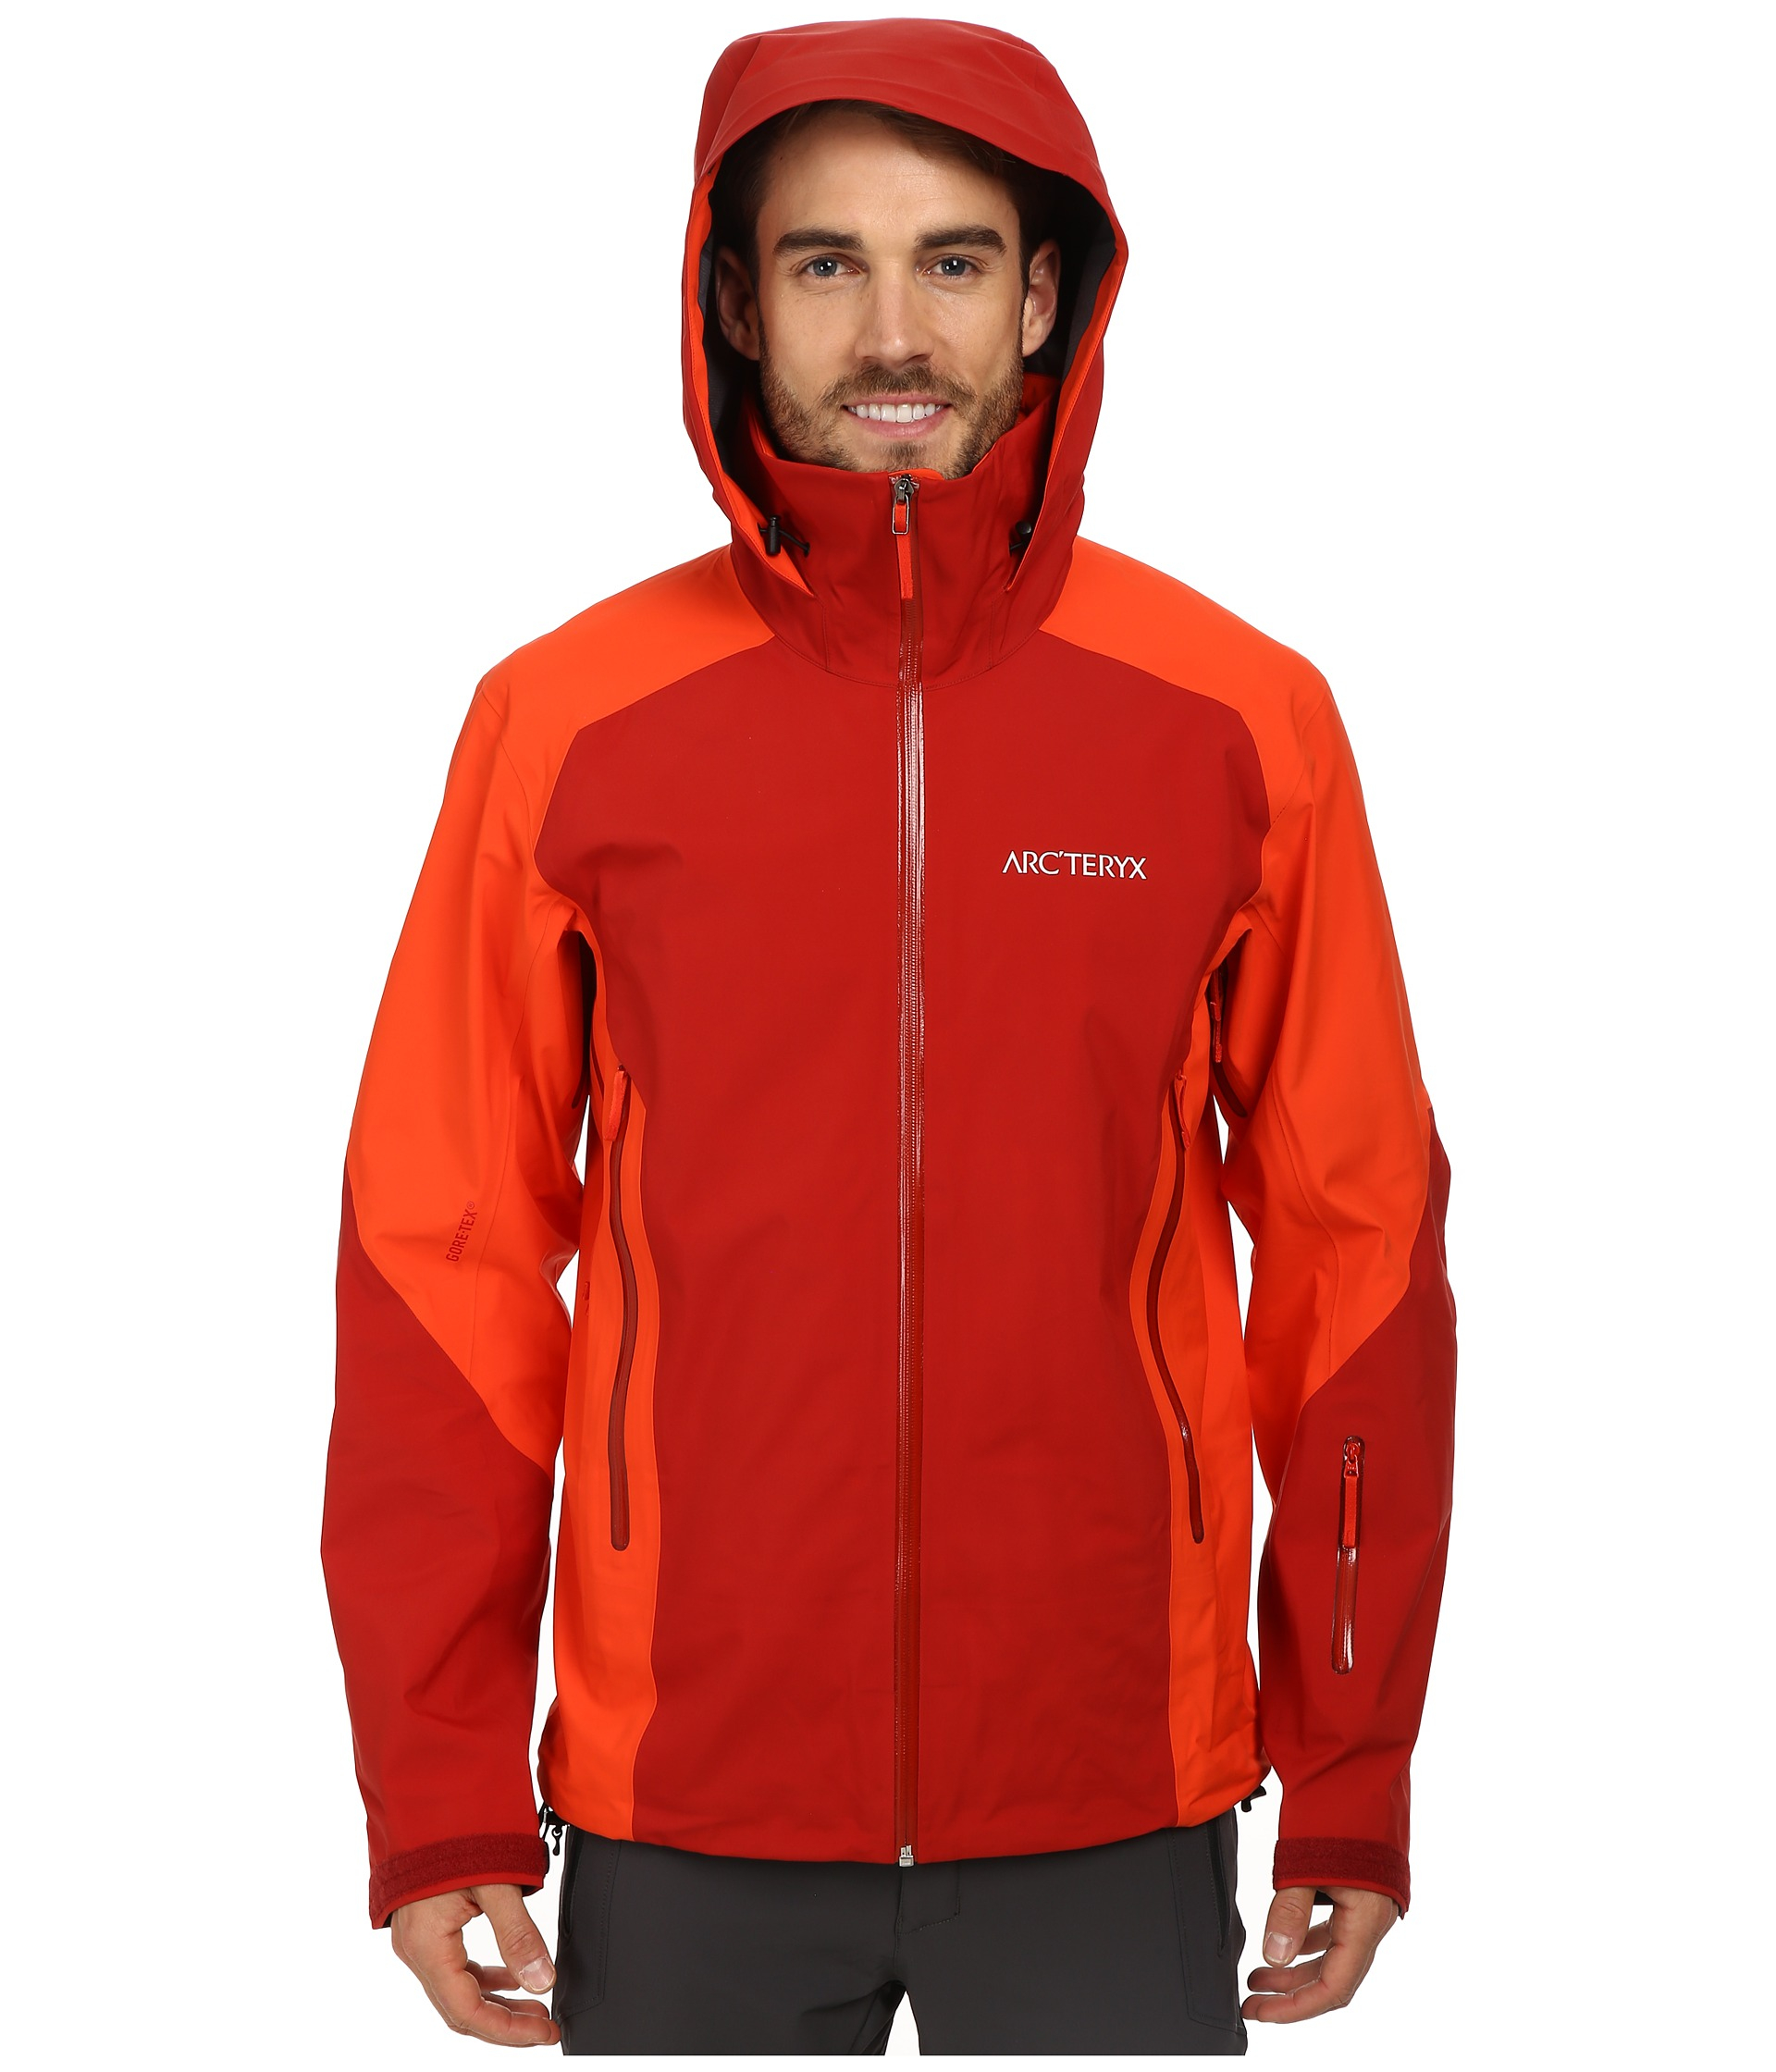 Arc'teryx Stingray Jacket in Red for Men - Lyst